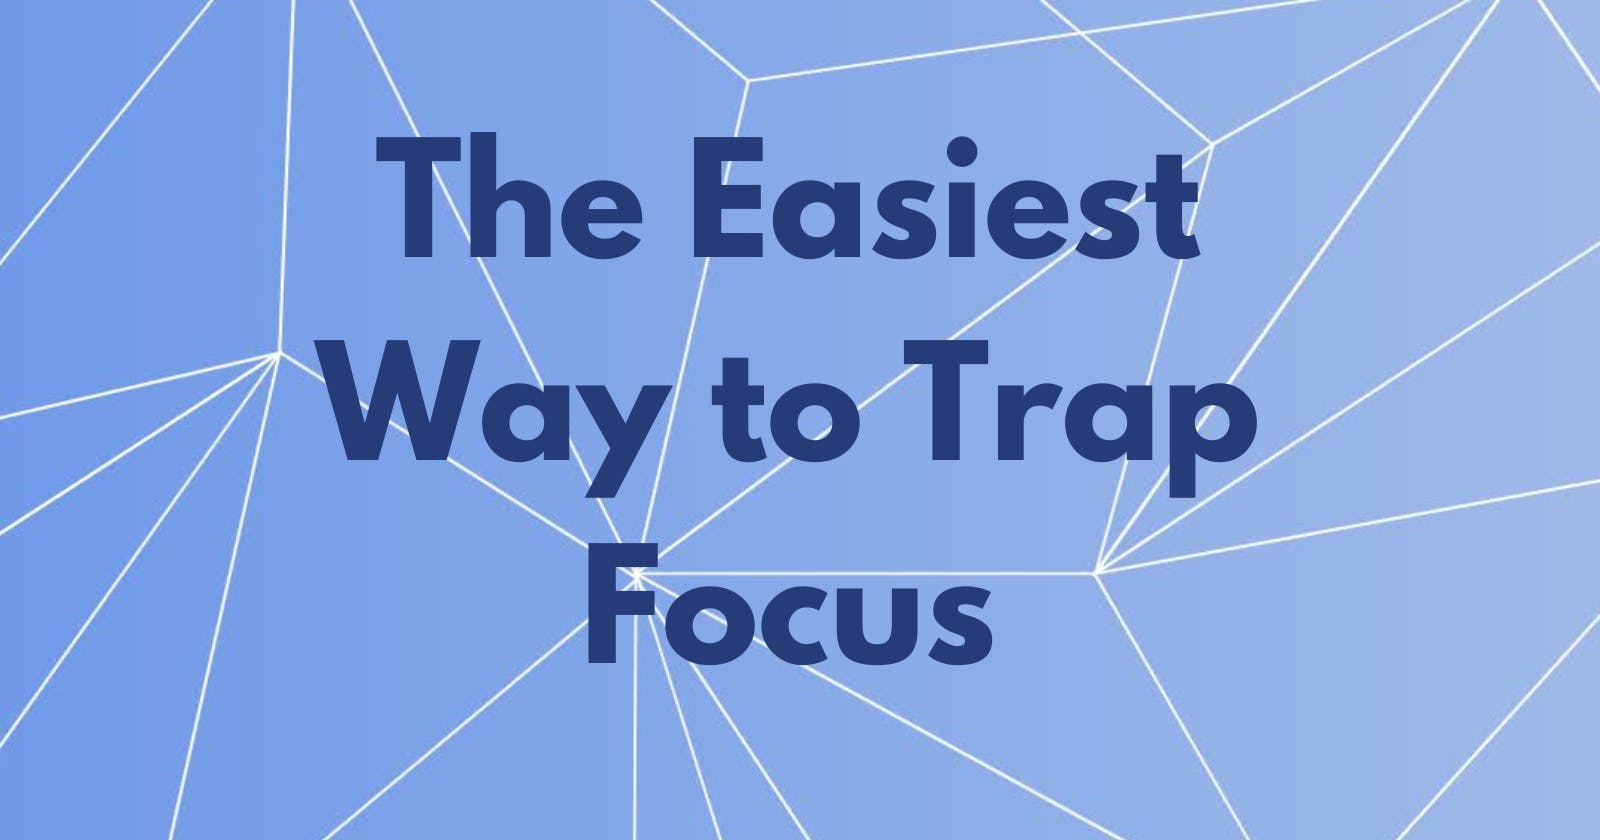 The Easiest Way to Trap Focus